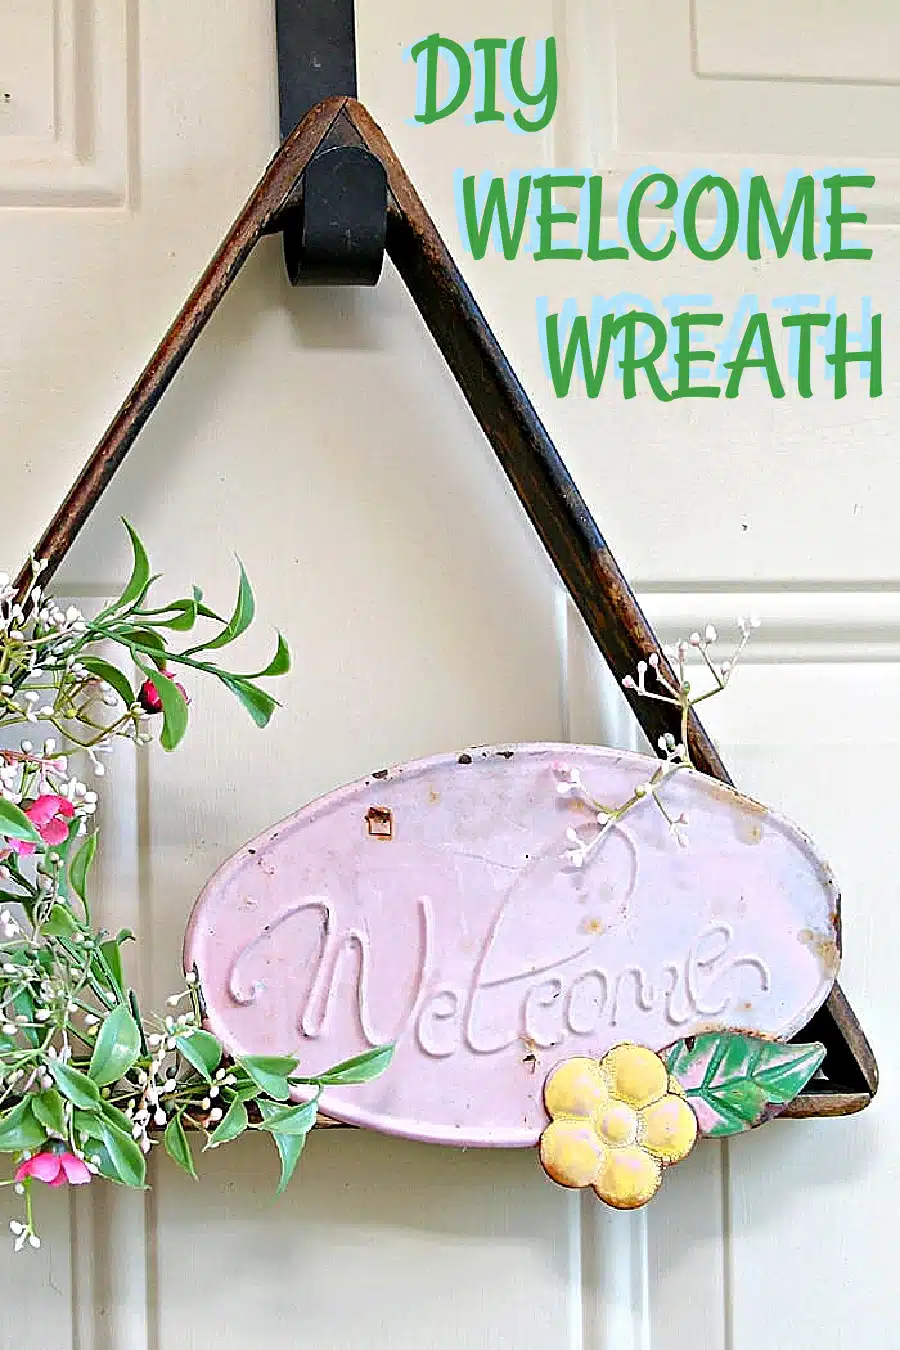 DIY welcome wreath made with recycled wood rack